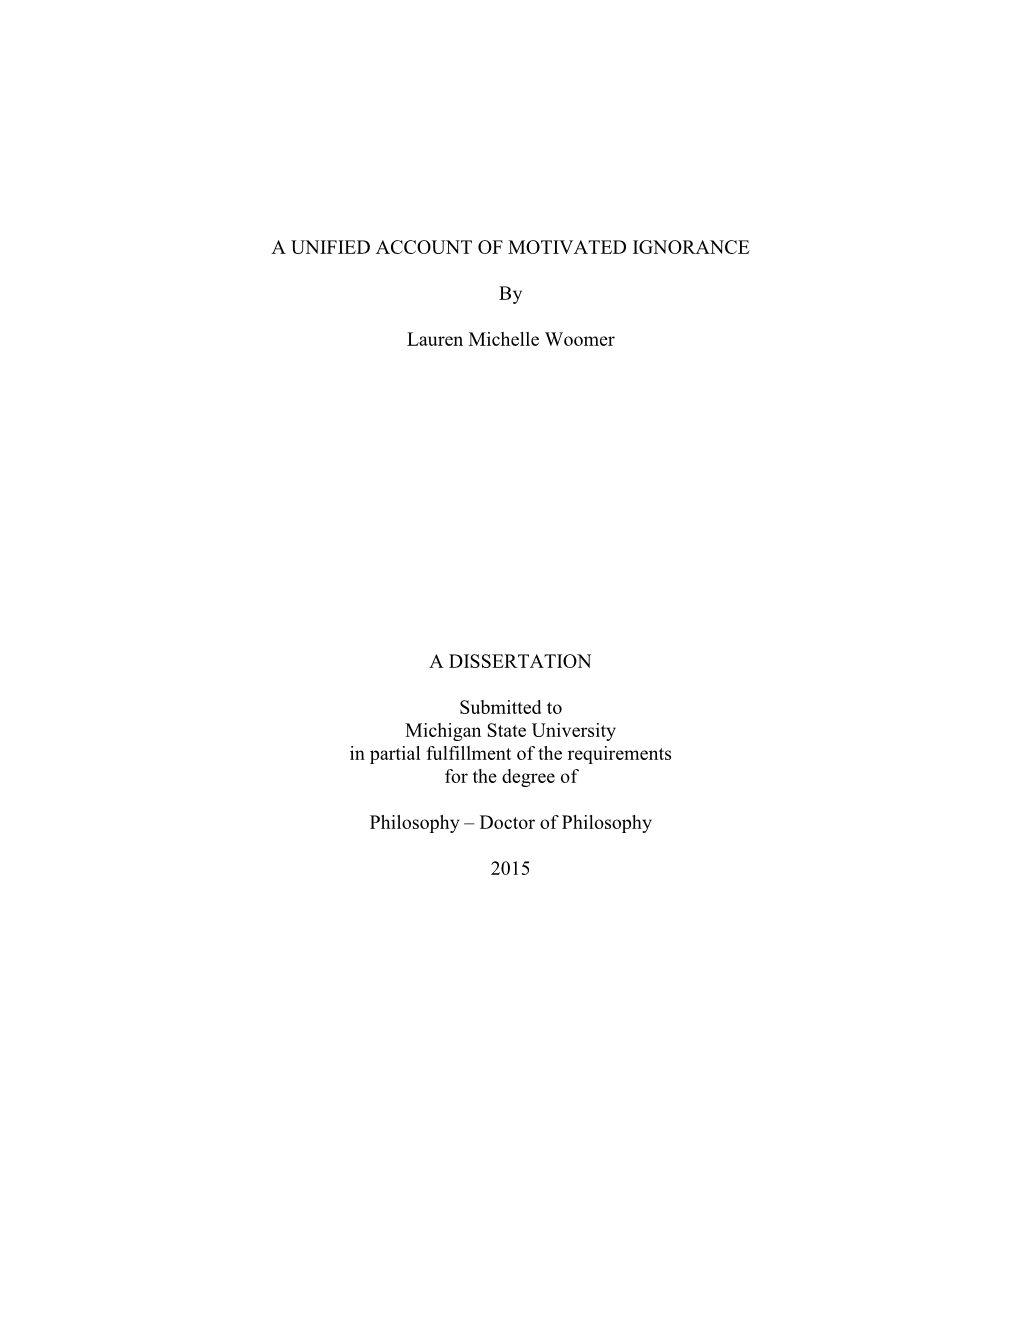 A UNIFIED ACCOUNT of MOTIVATED IGNORANCE by Lauren Michelle Woomer a DISSERTATION Submitted to Michigan State University in Part